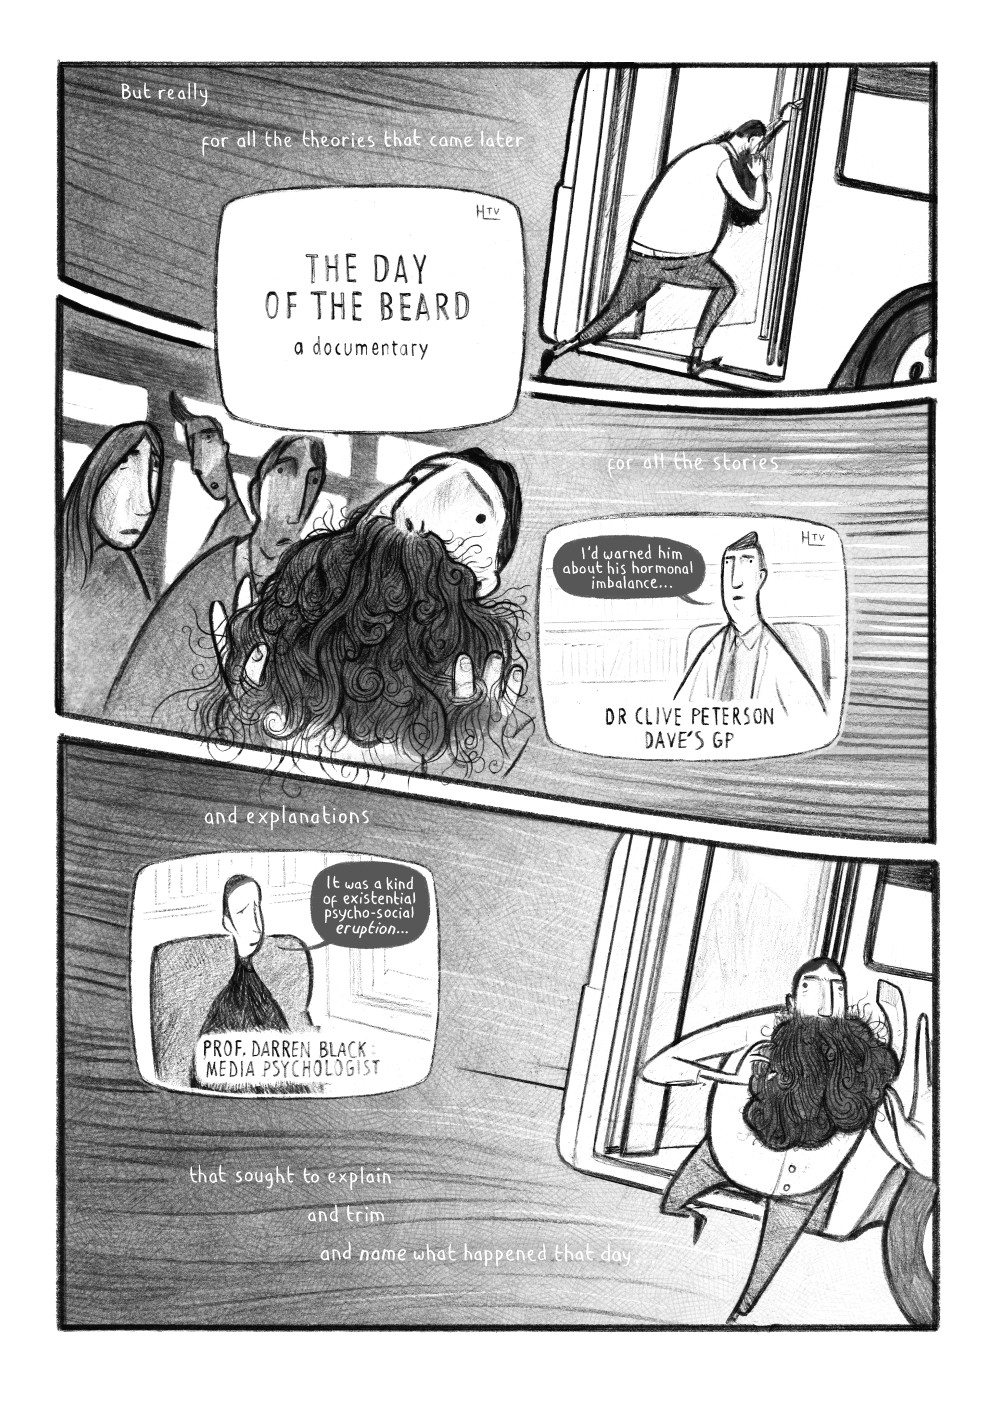 the gigantic beard that was evil by stephen collins